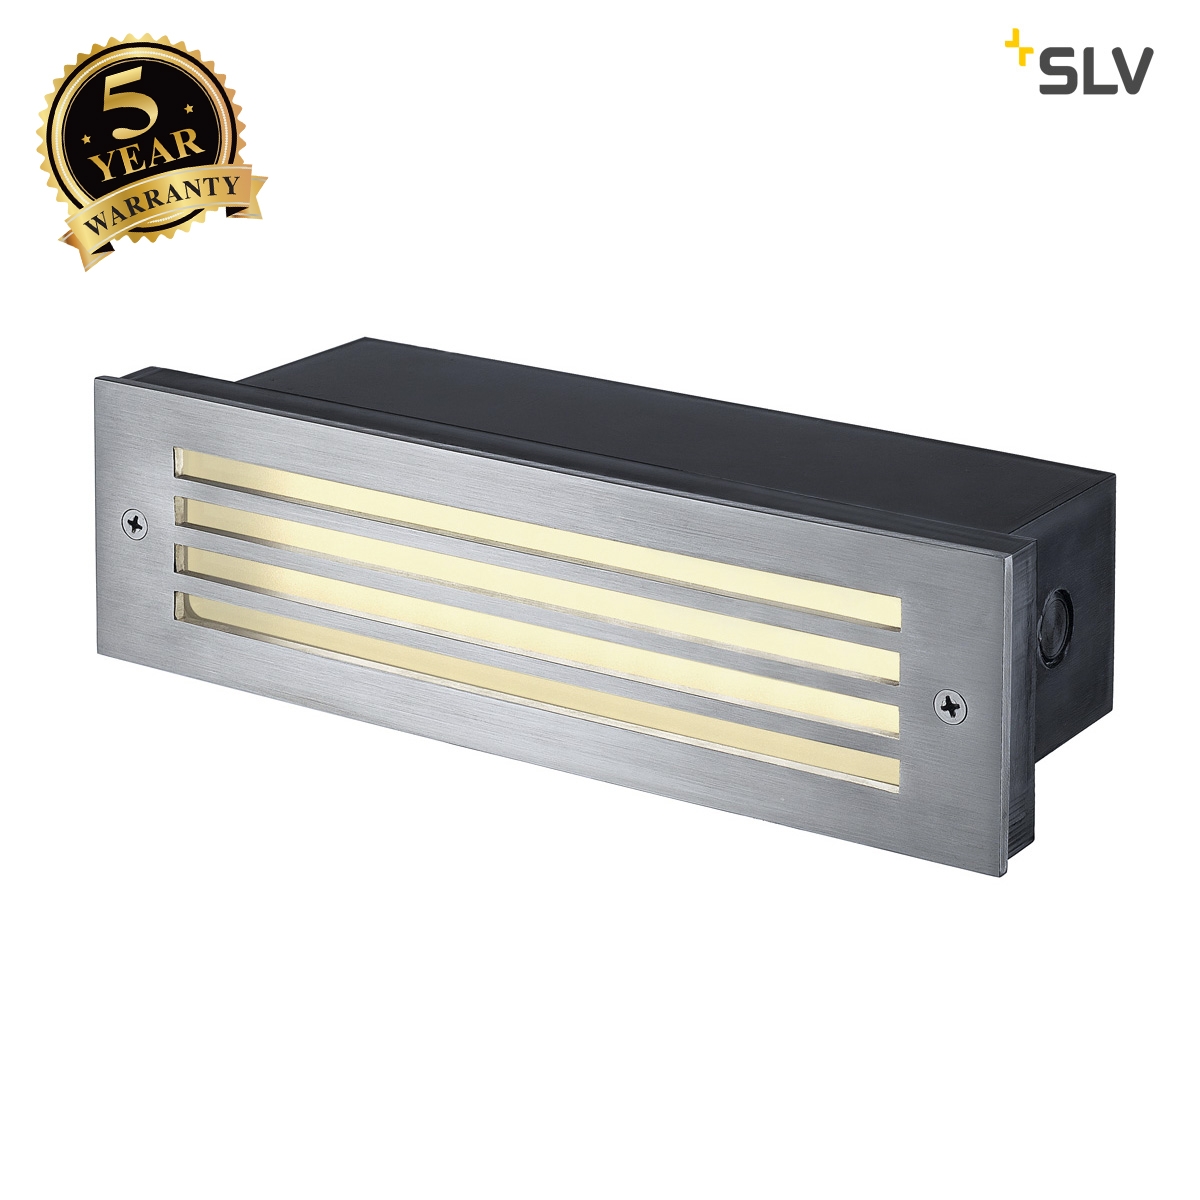 SLV BRICK MESH LED STAINLESS STEEL 316 recessed wall light, 4W LED, warm white, IP54 229110